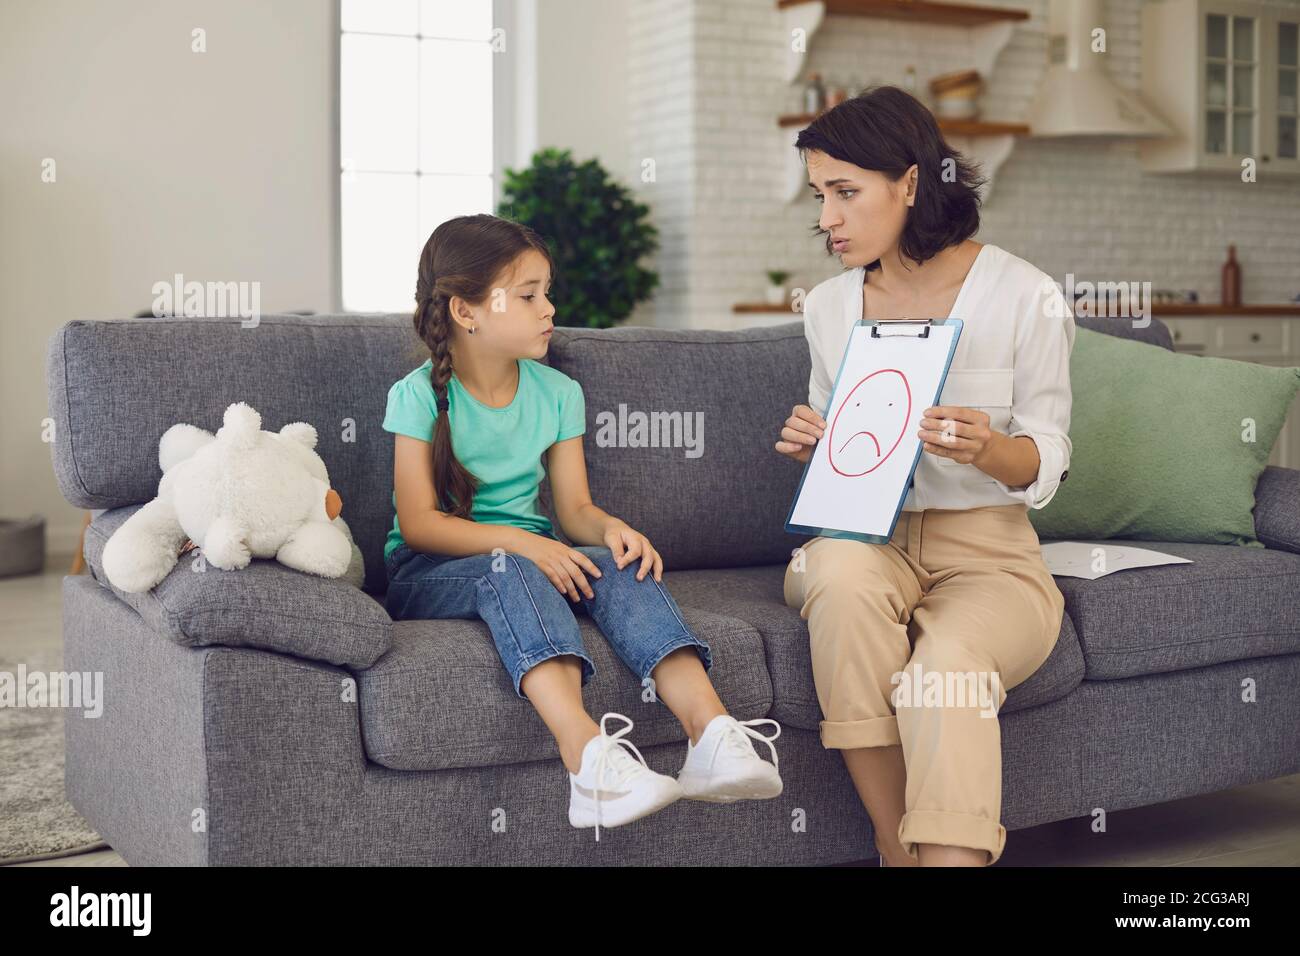 Little girl looks at a picture shown to her by a child psychologist at her reception. Stock Photo